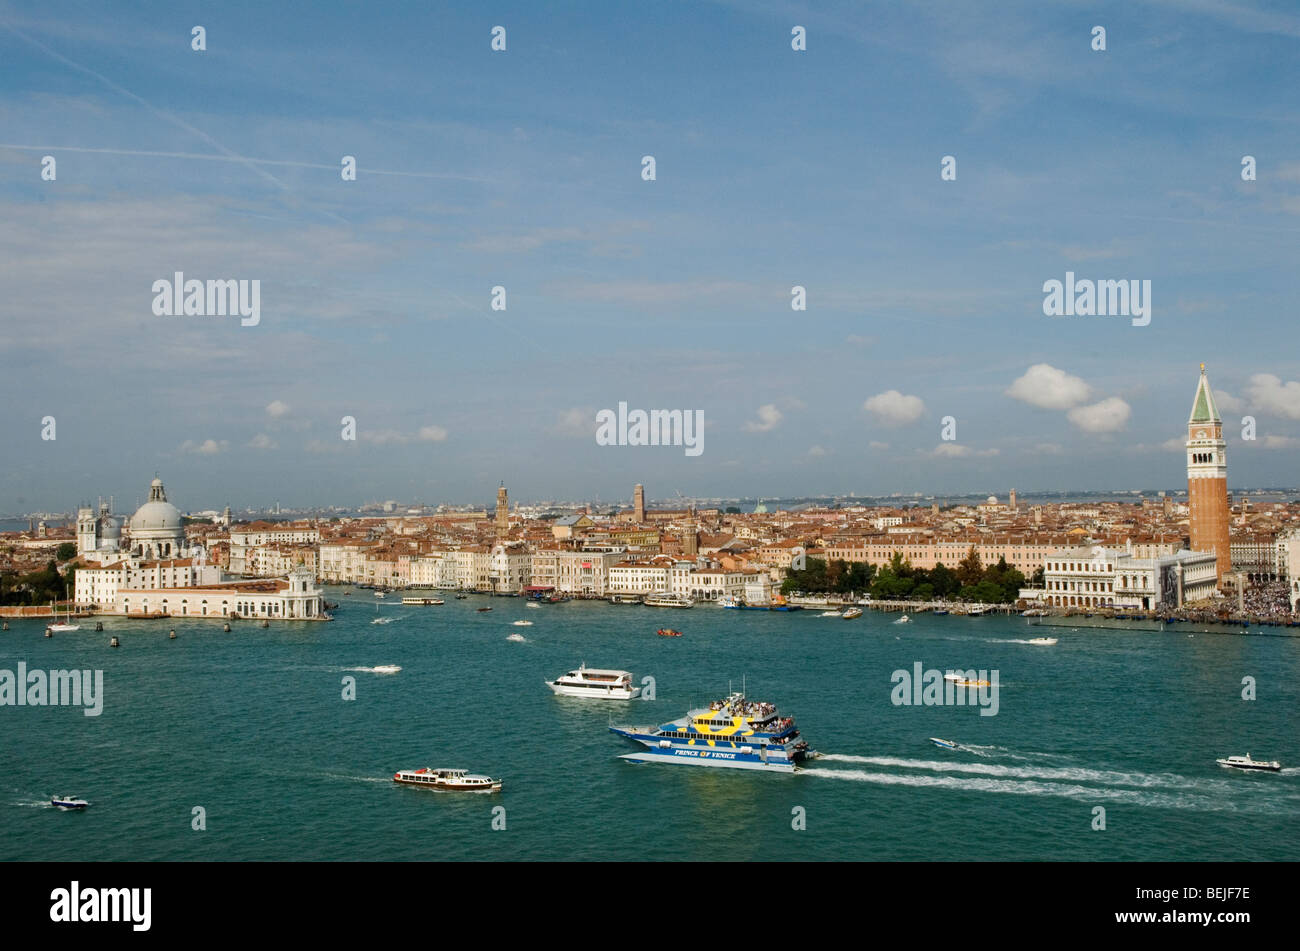 Venice Italy skyline Canale di San Marco St Marks Square. Piazza San Marco ( right of image) HOMER SYKES Stock Photo